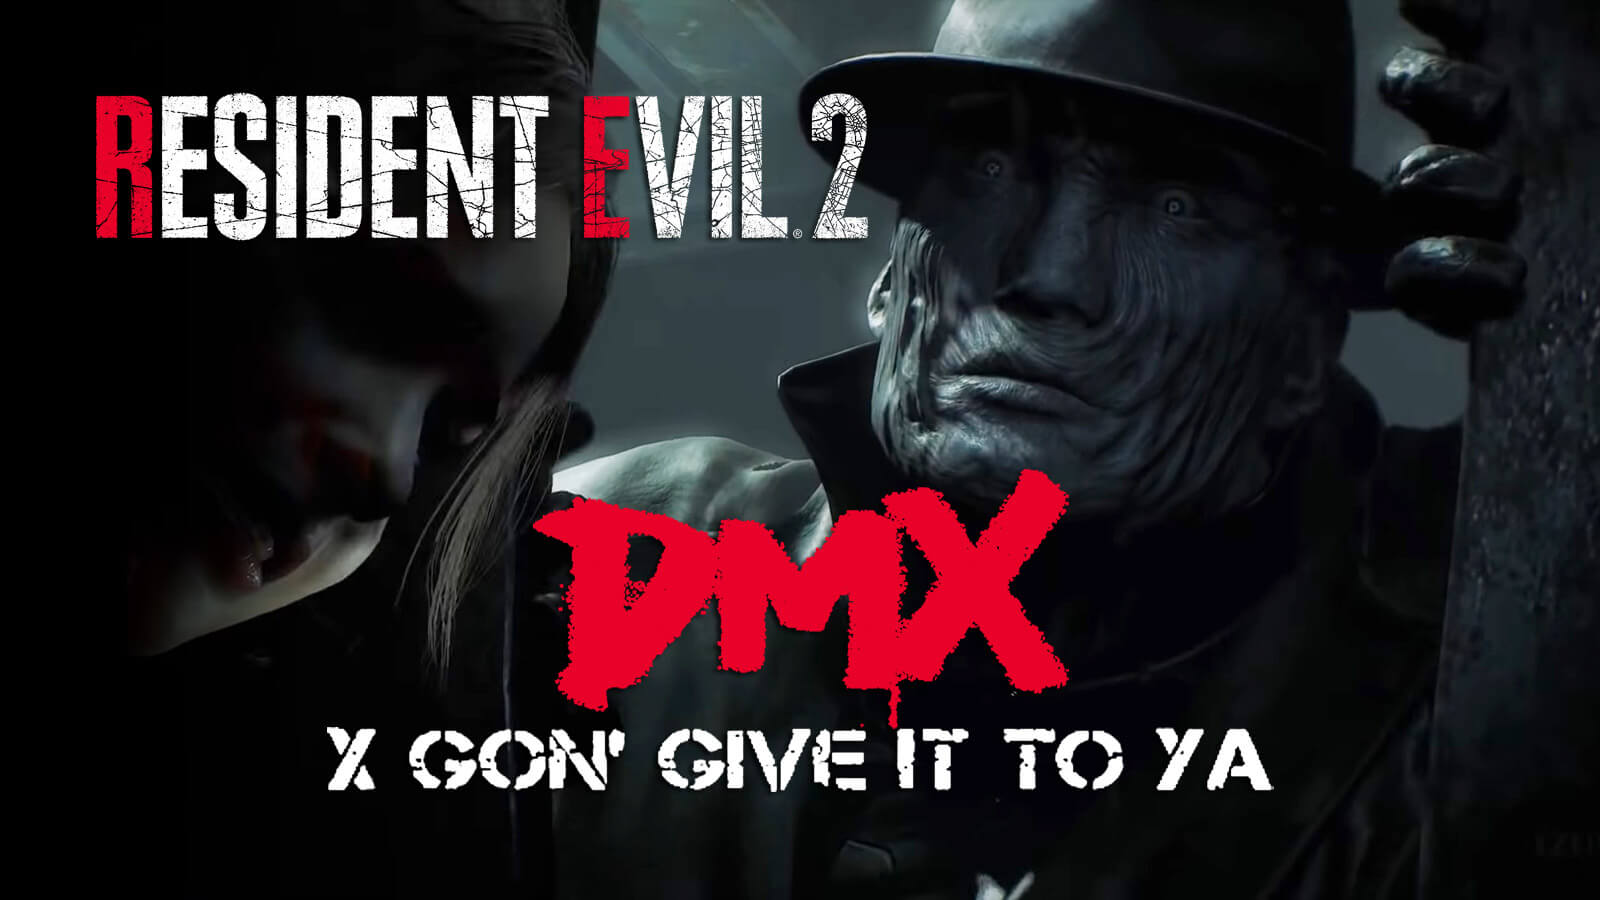 Resident Evil 2' Mod Replaces Mr. X With 'Resident Evil 3' Baddie